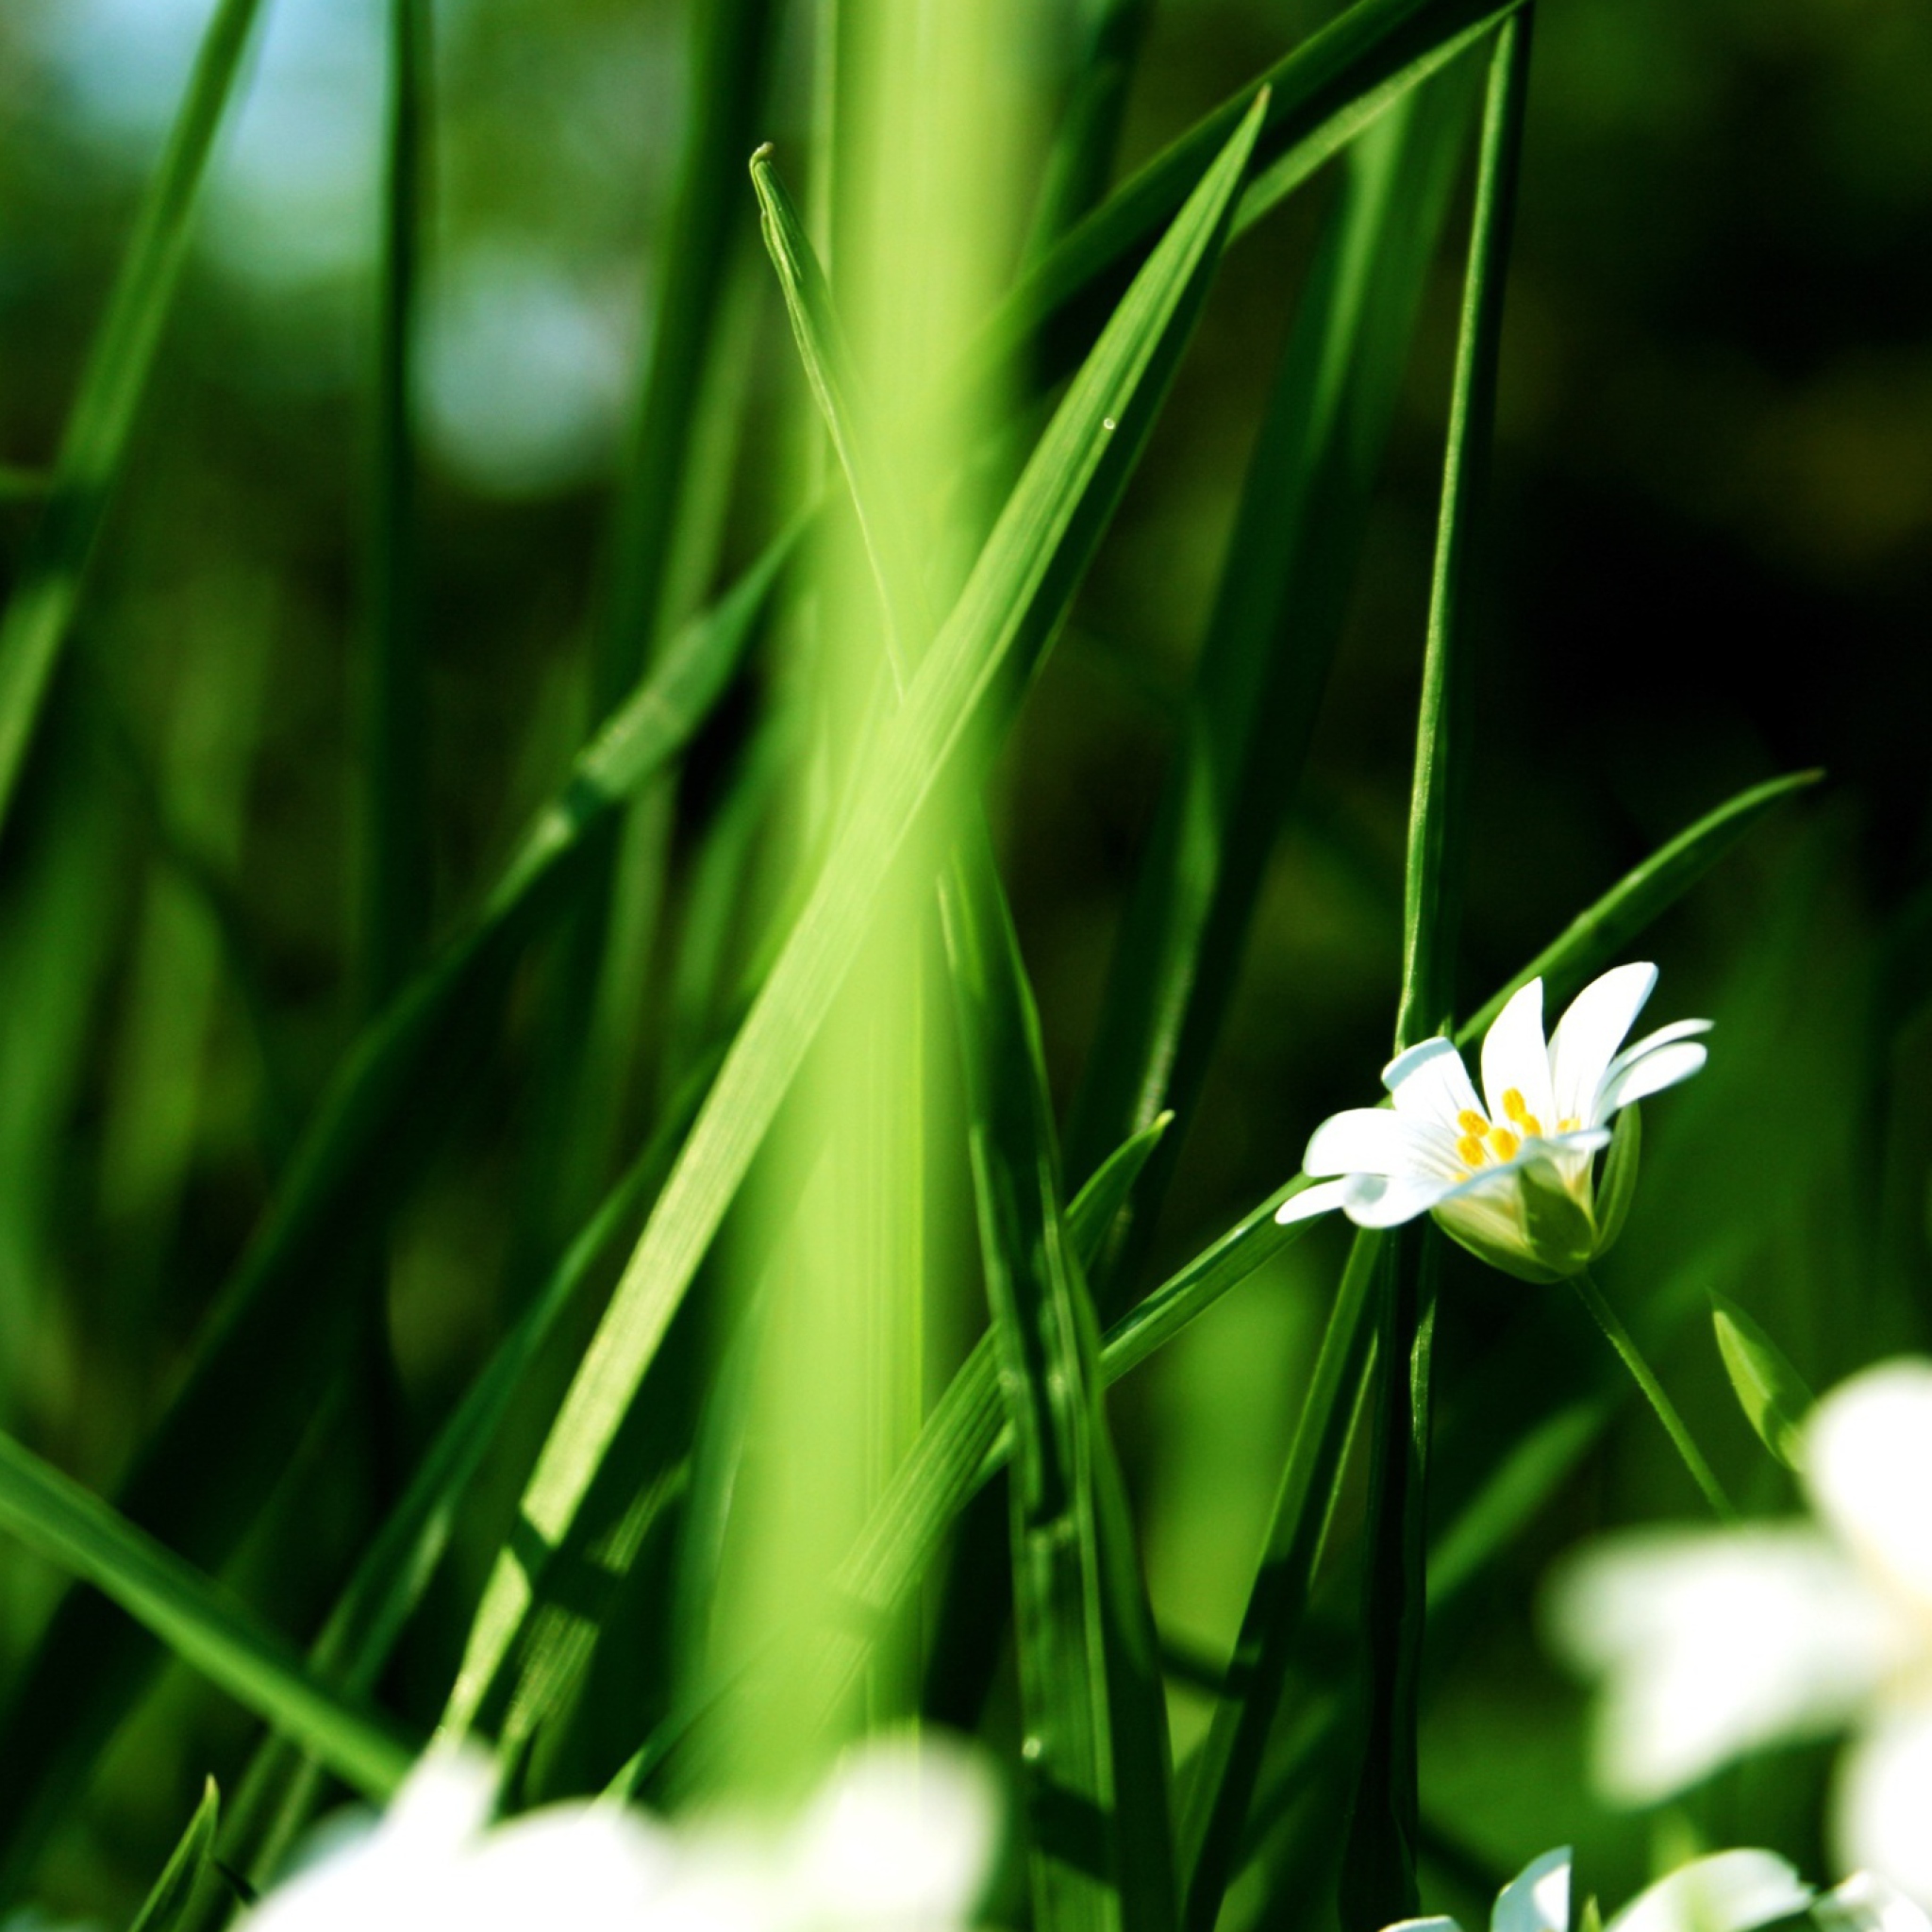 Grass And White Flowers wallpaper 2048x2048